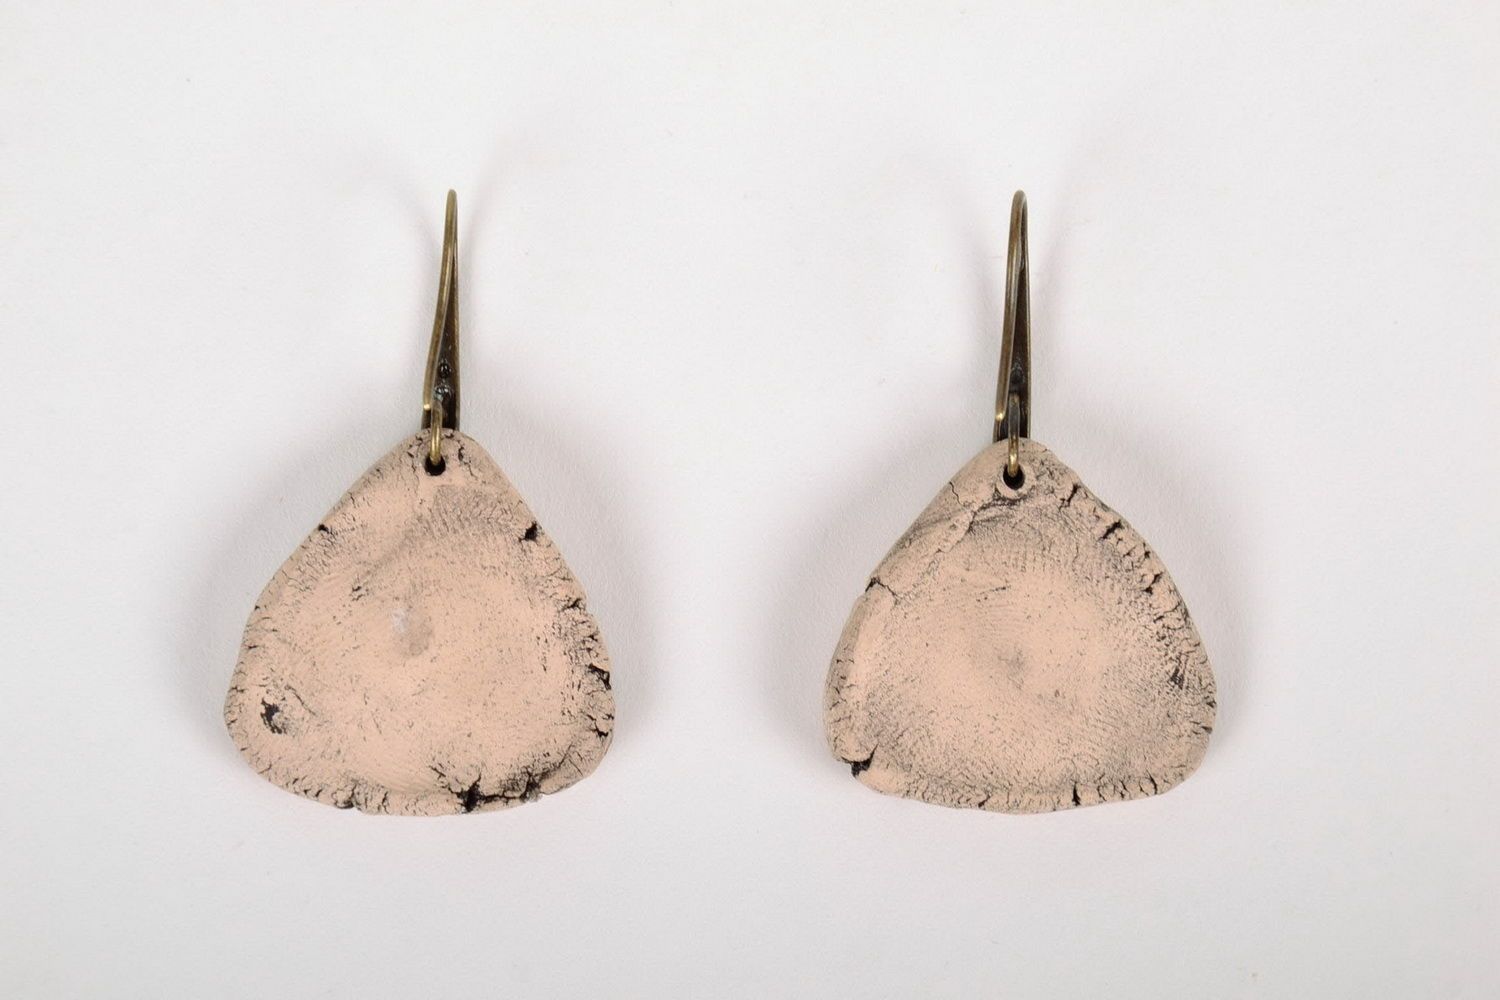 Ceramic earrings with glass parts photo 3